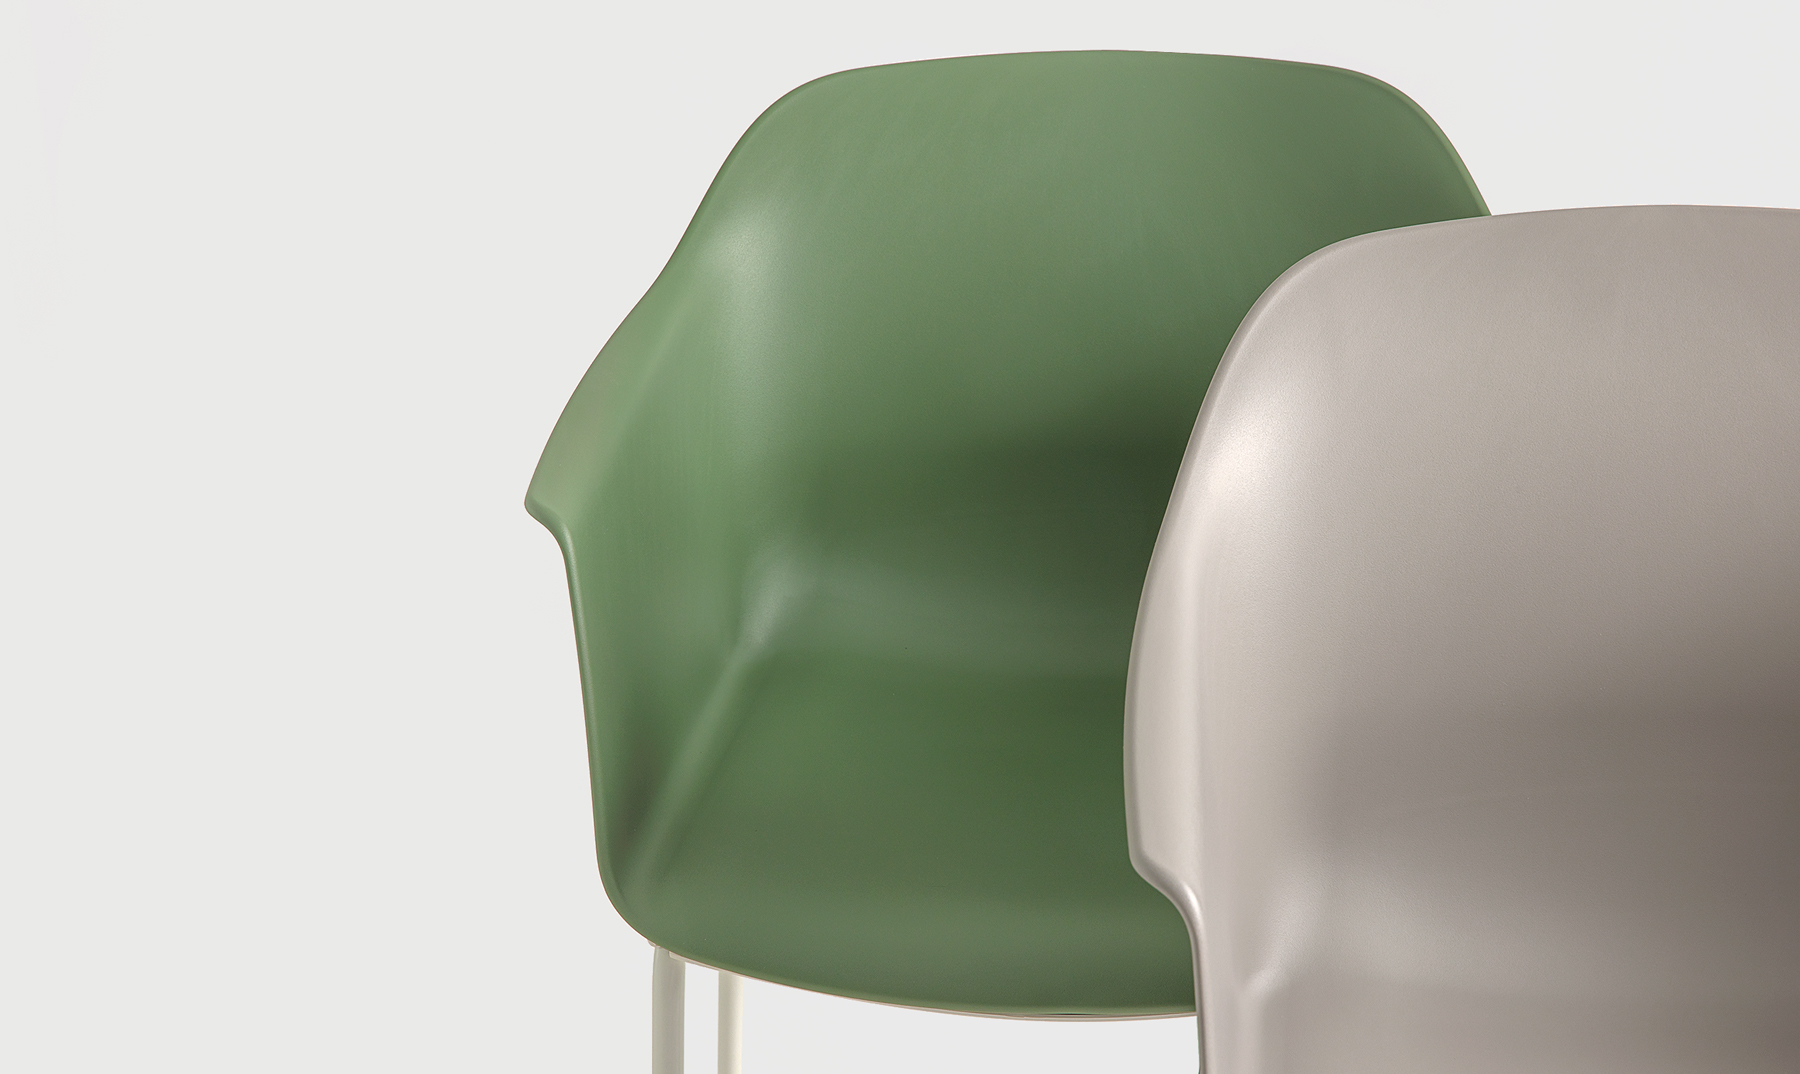 The image shows a front view of two Noom 60 chairs designed by Alegre Design for Actiu. One chair is light gray, and the other is green. Both chairs feature a smooth, curved bucket-style seat with integrated armrests and a minimalist design.